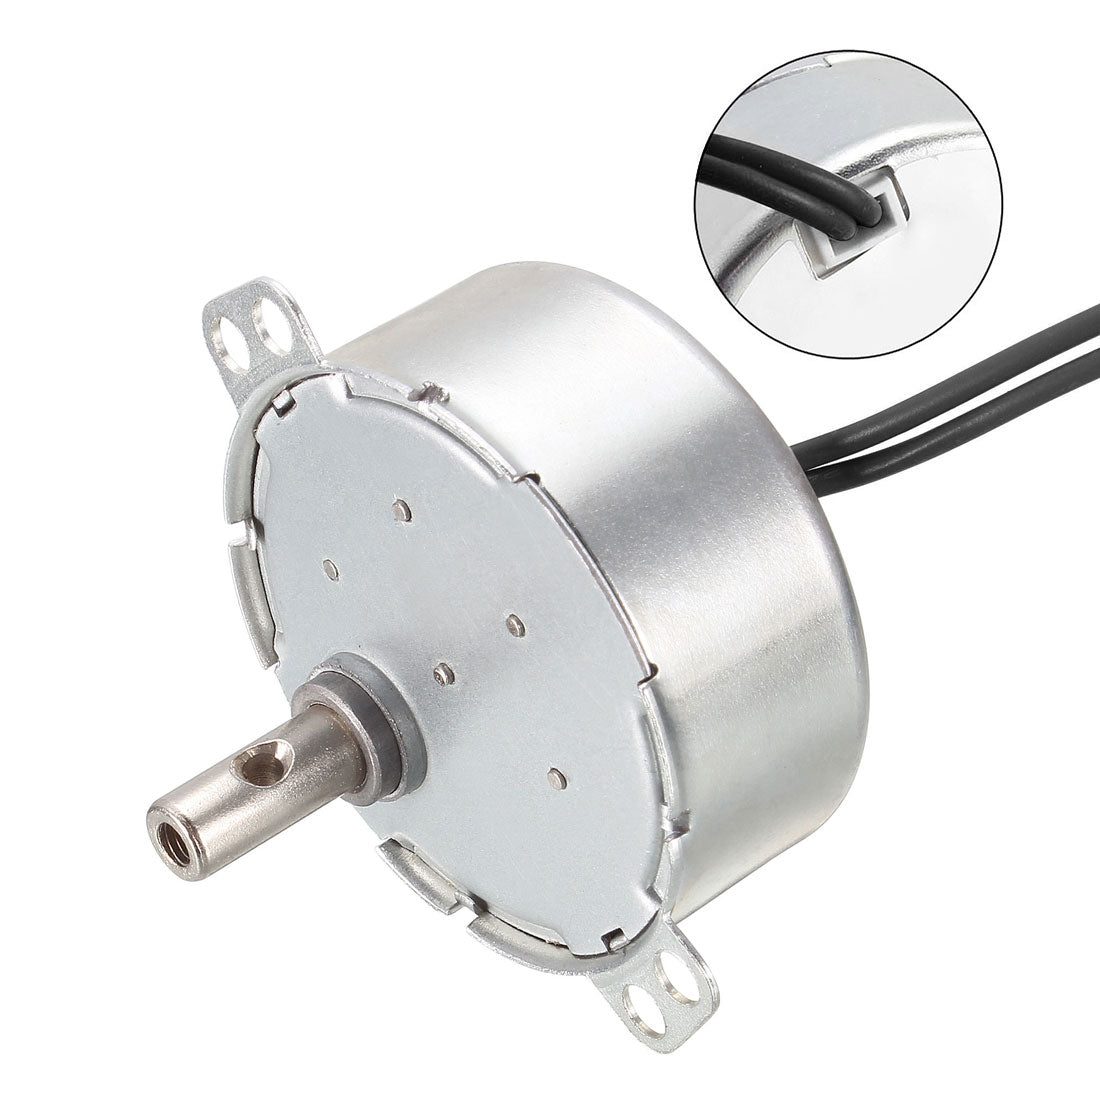 uxcell Uxcell Synchronous Motor AC 220-240V 2-2.4RPM 50-60Hz CCW/CW 4W Reduction Gear Motor